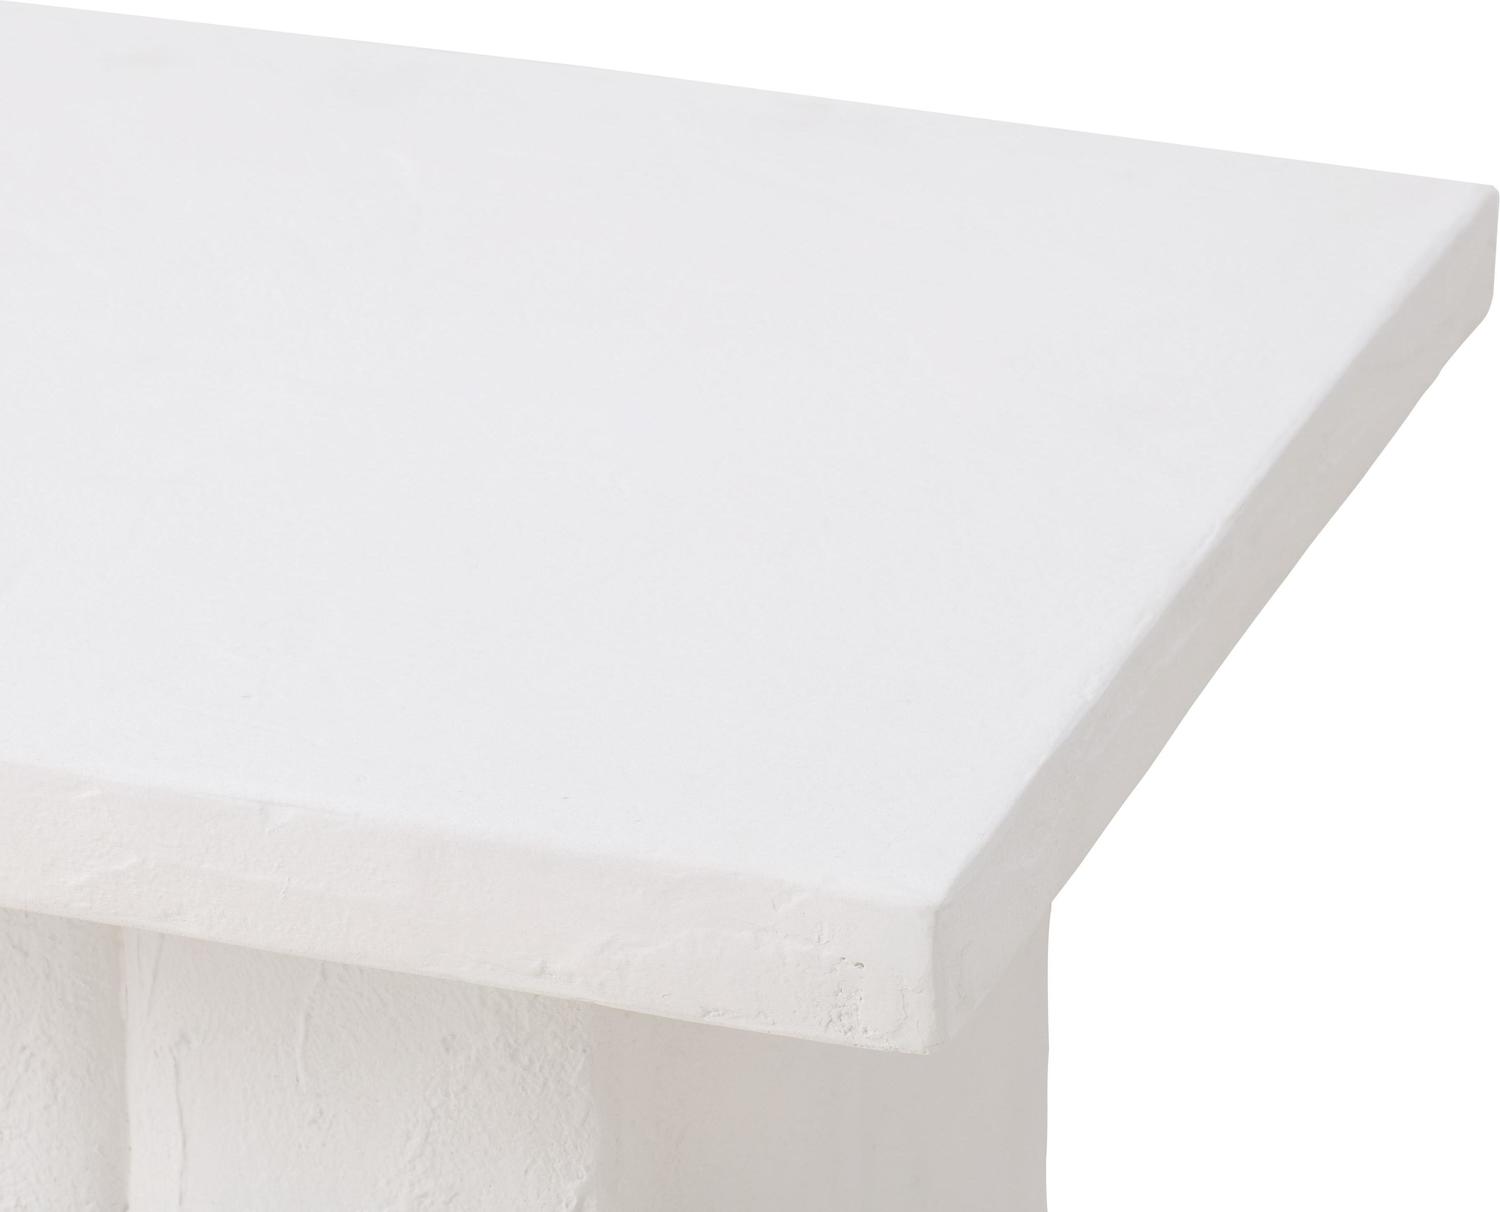 small nesting tables Contemporary Design Furniture Side Tables White